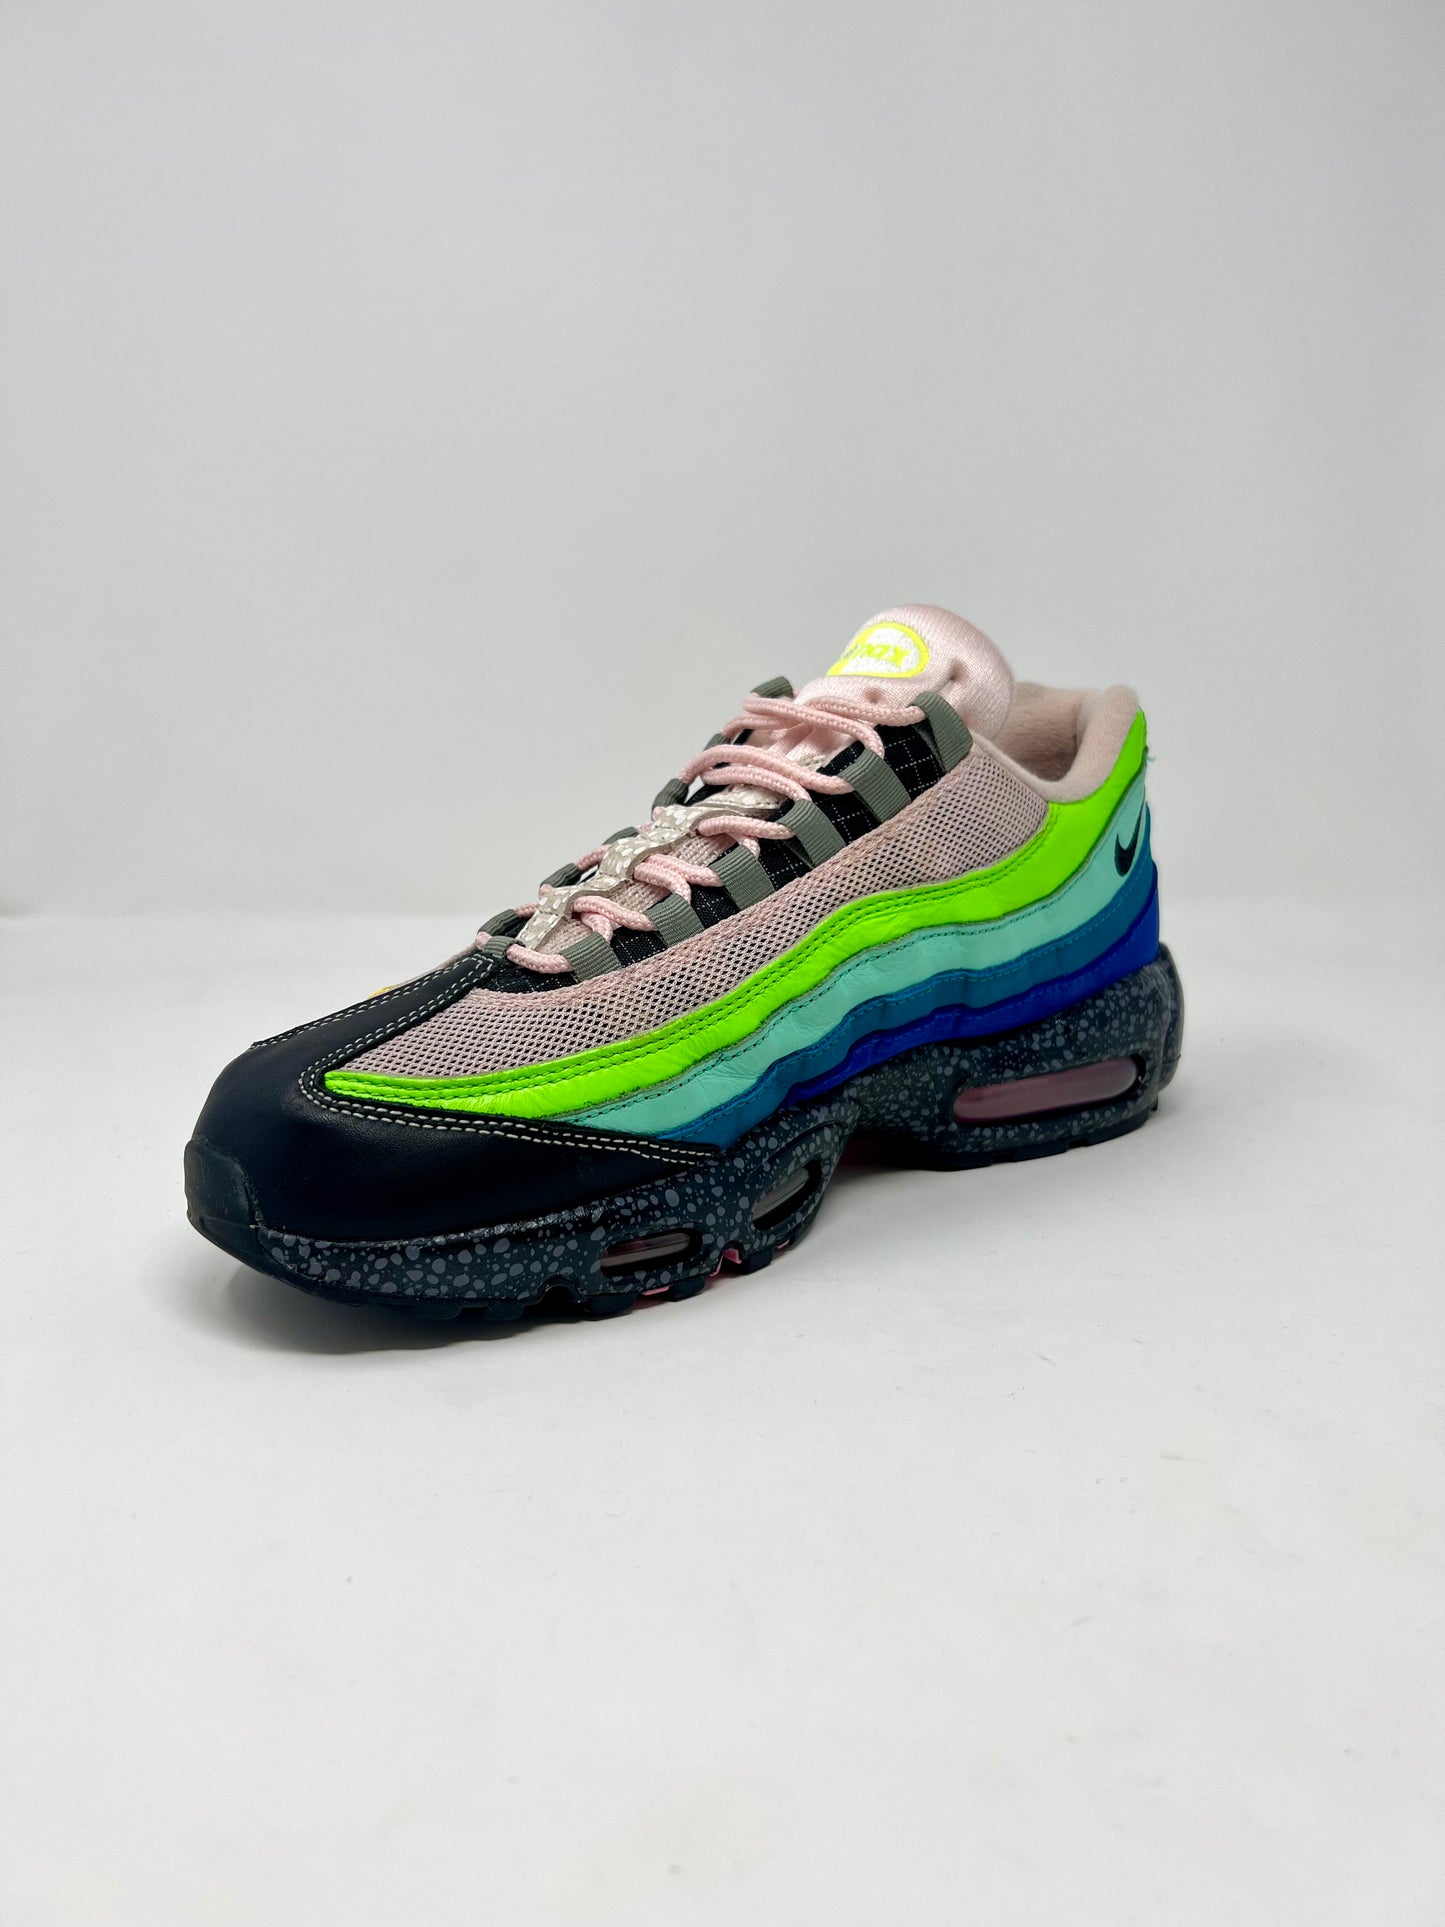 Nike Air Max 95 Size? 20 for 20 UK9